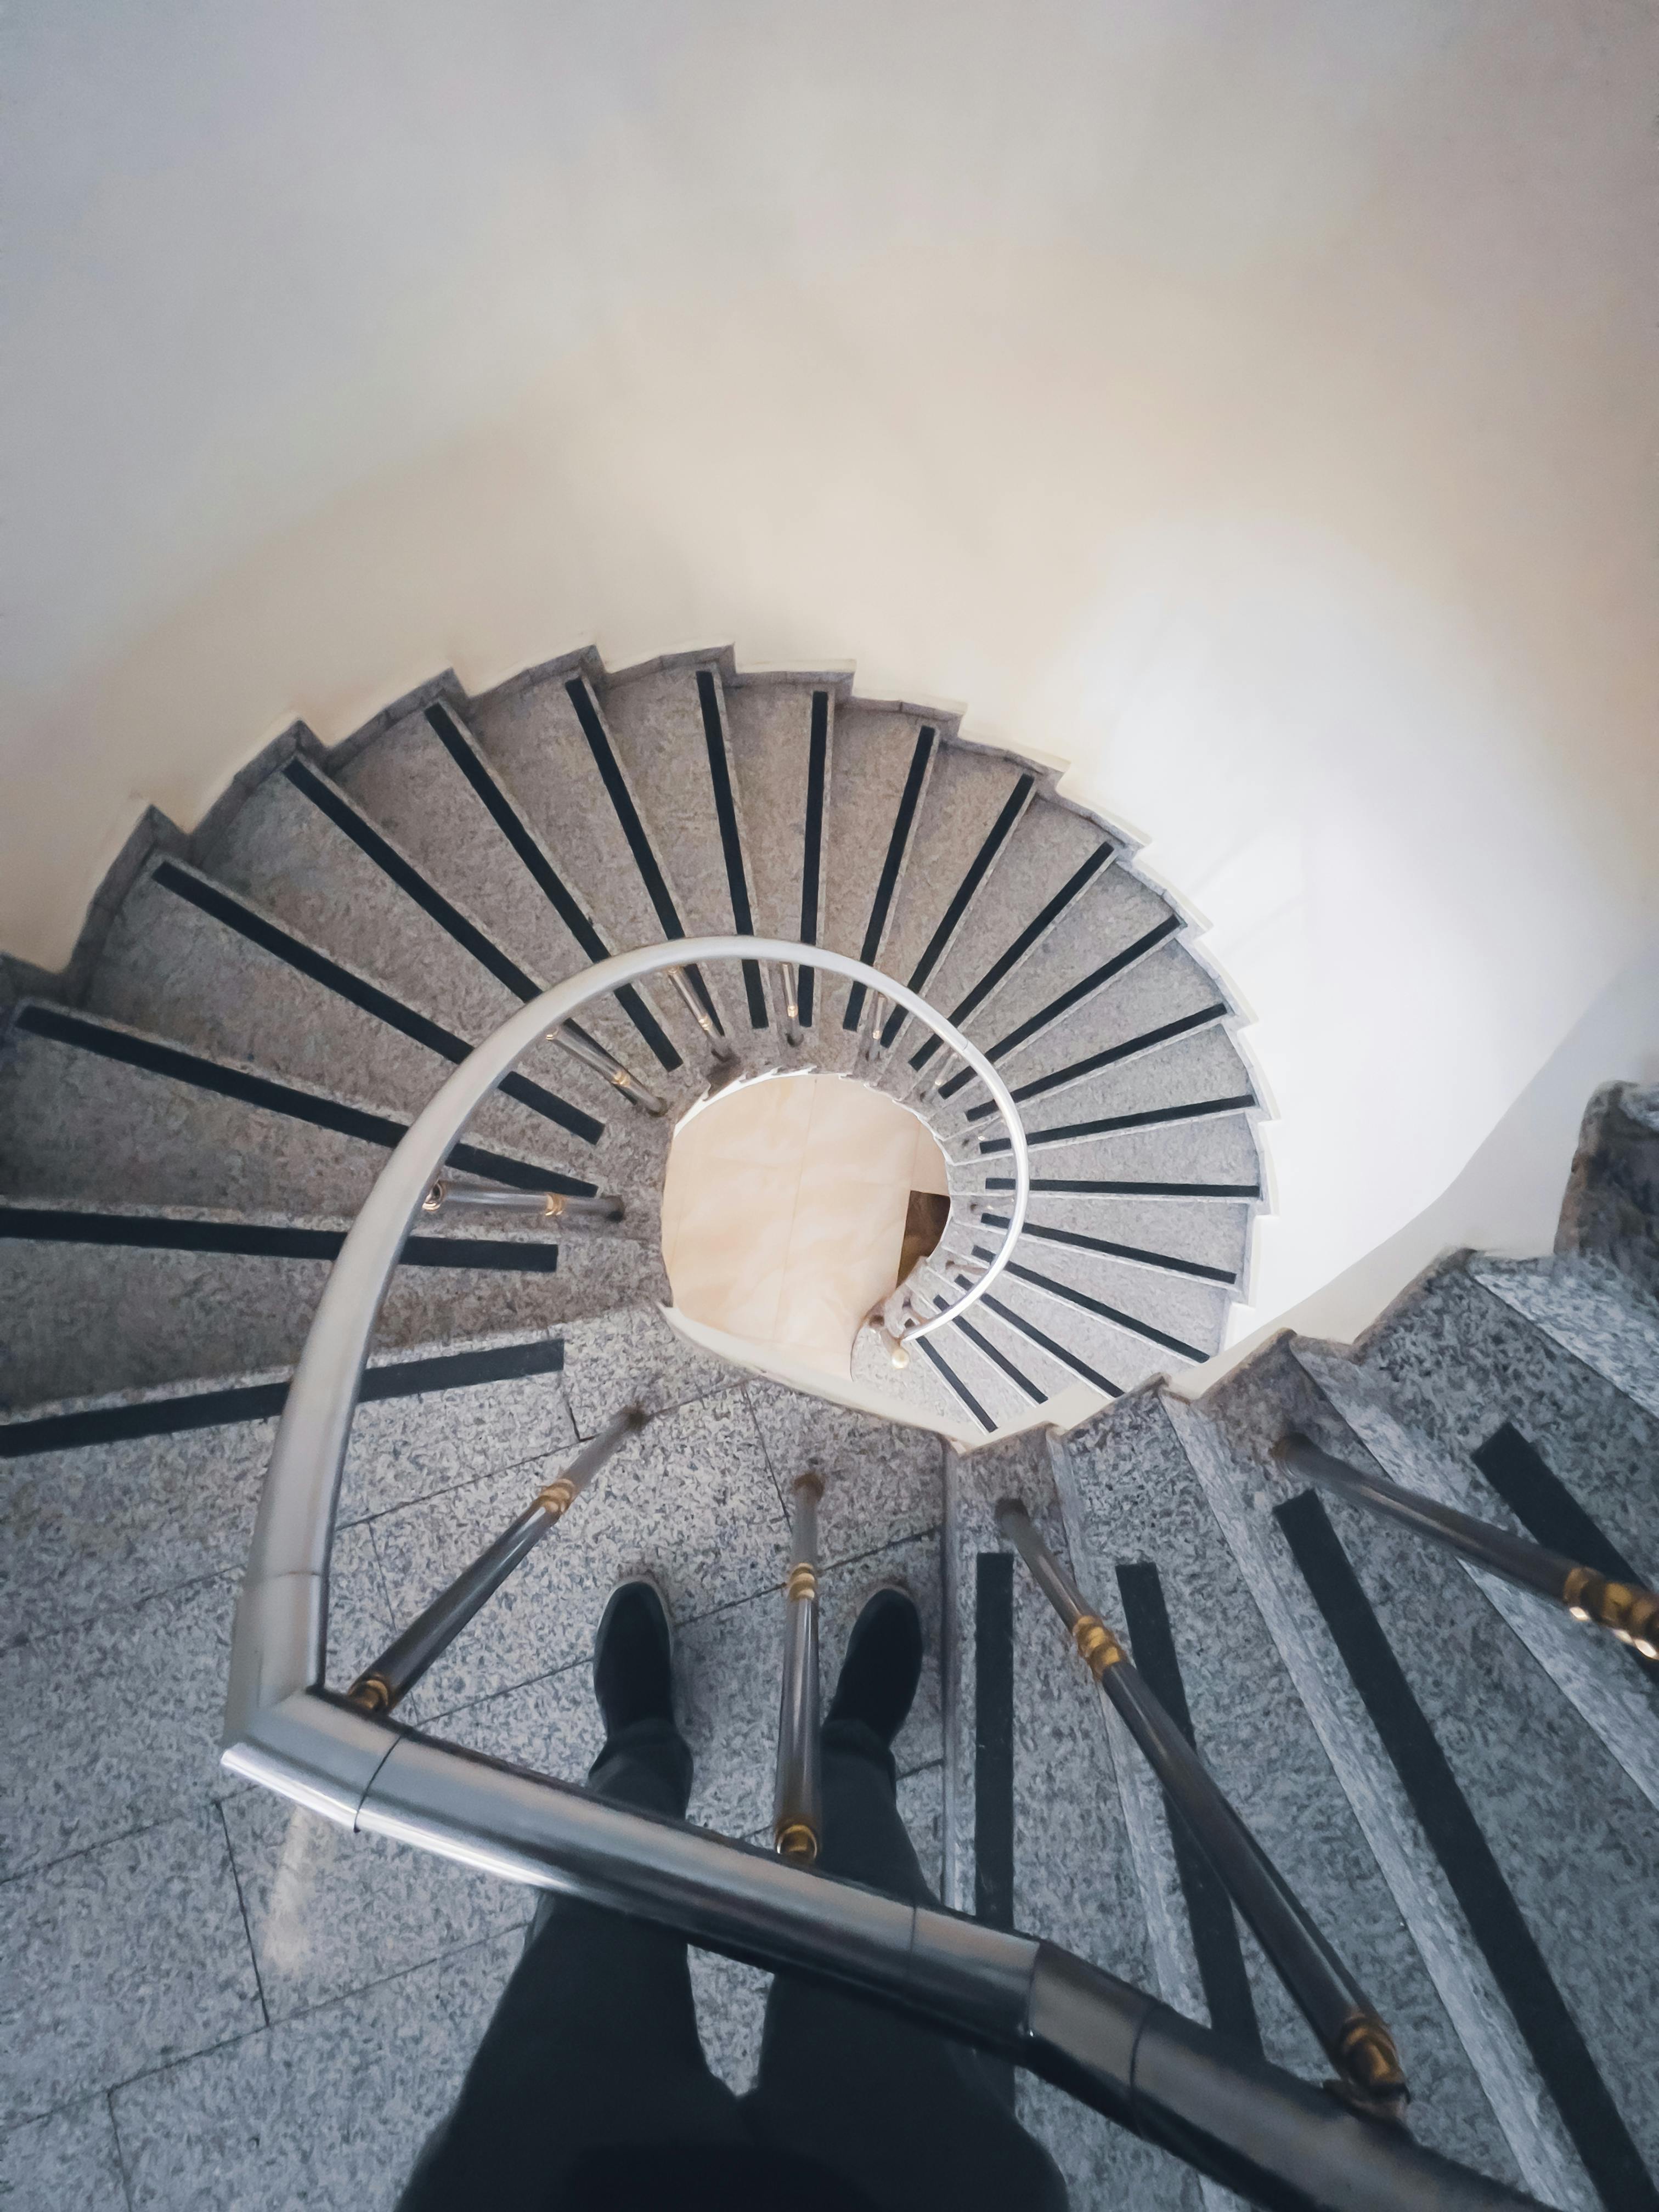 6,000+ Free Spiral Staircase & Stairs Images - Pixabay